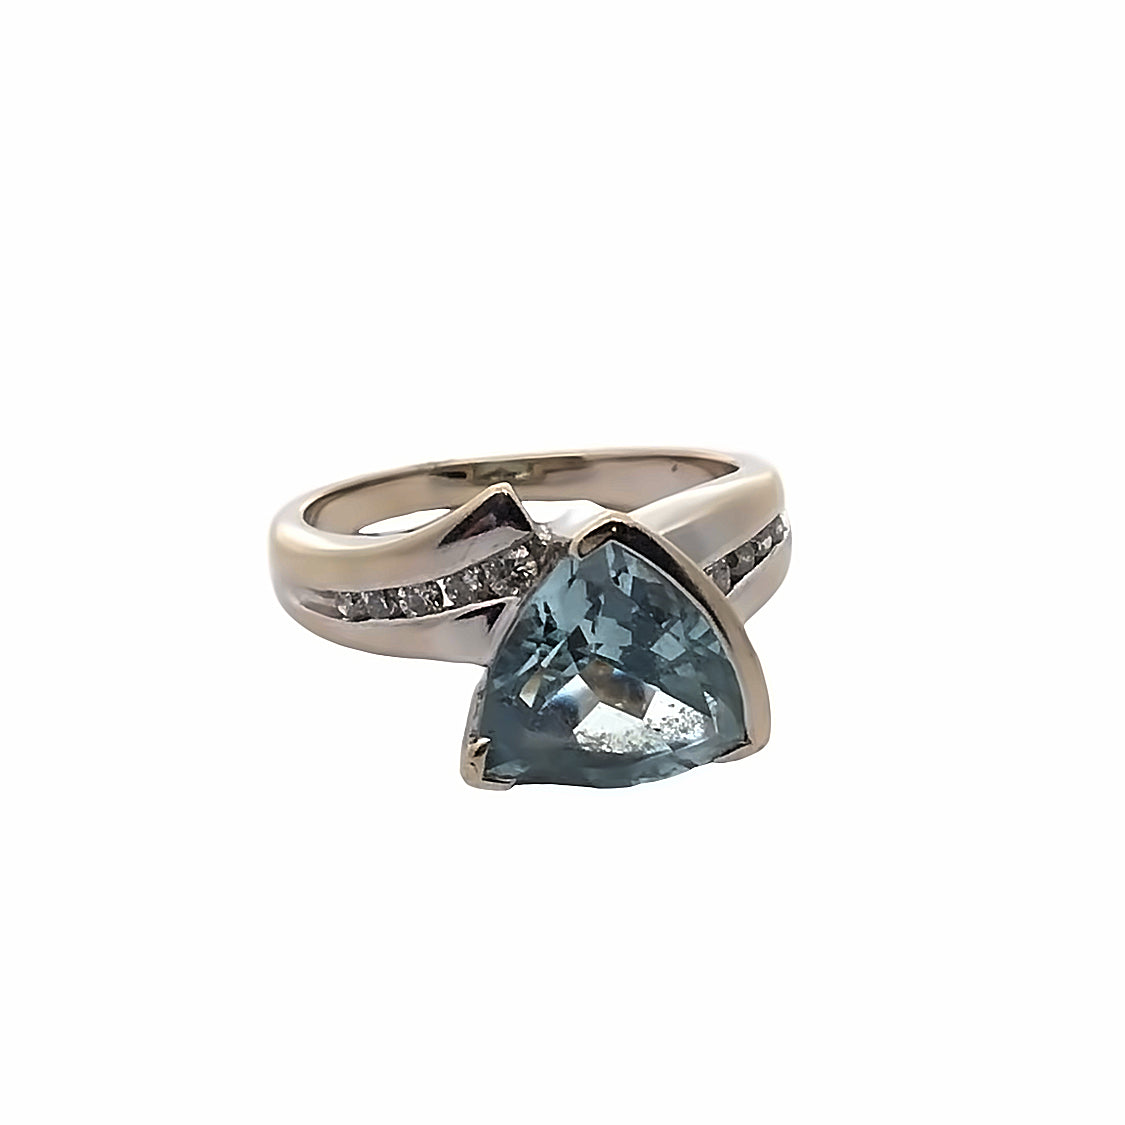 14K White Gold Ring with Trillion Cut Aquamarine Accented by Diamonds